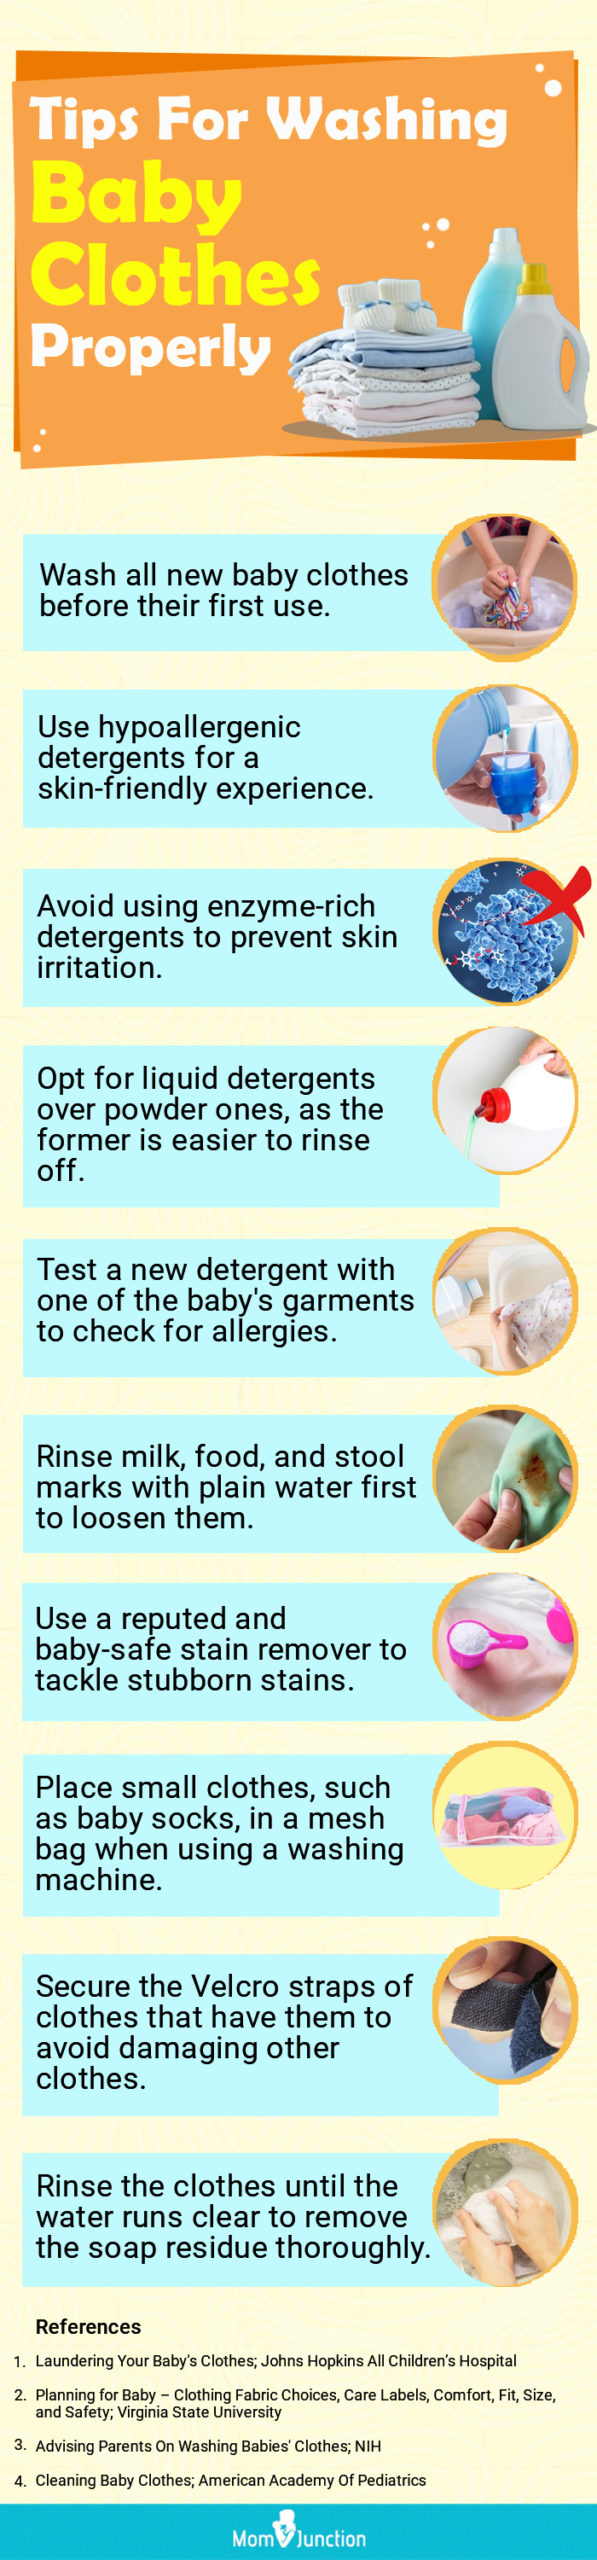 Tips For Washing Baby Clothes Properly (infographic)